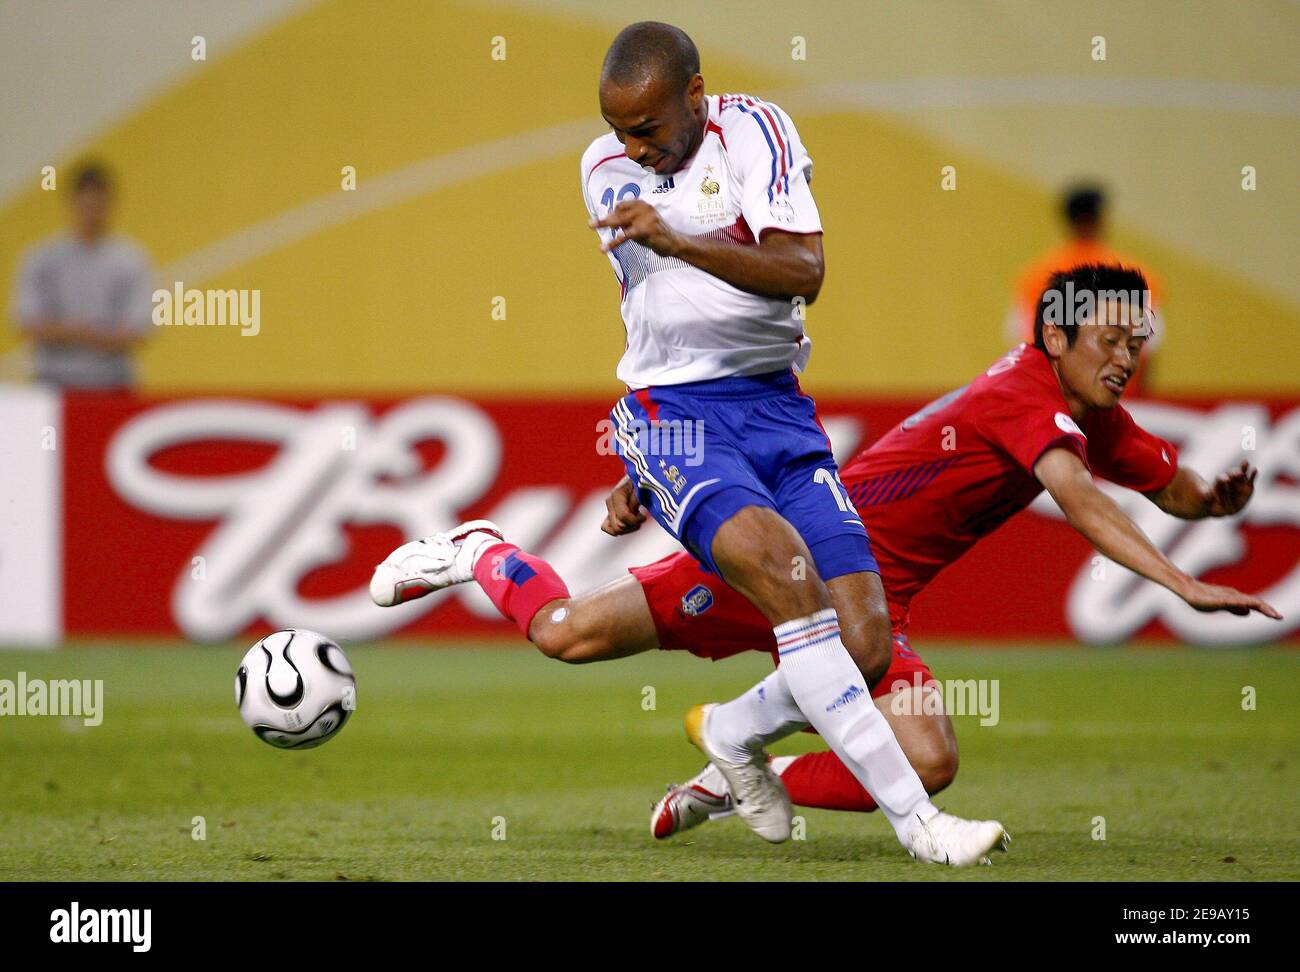 France's Thierry Henry in action during the World Cup 2006, Group G France vs South Korea, in Leipzig, Germany, on June 18, 2006. The game ended in draw 1-1. Photo by Christian Liewig/ABACAPRESS.COM Stock Photo